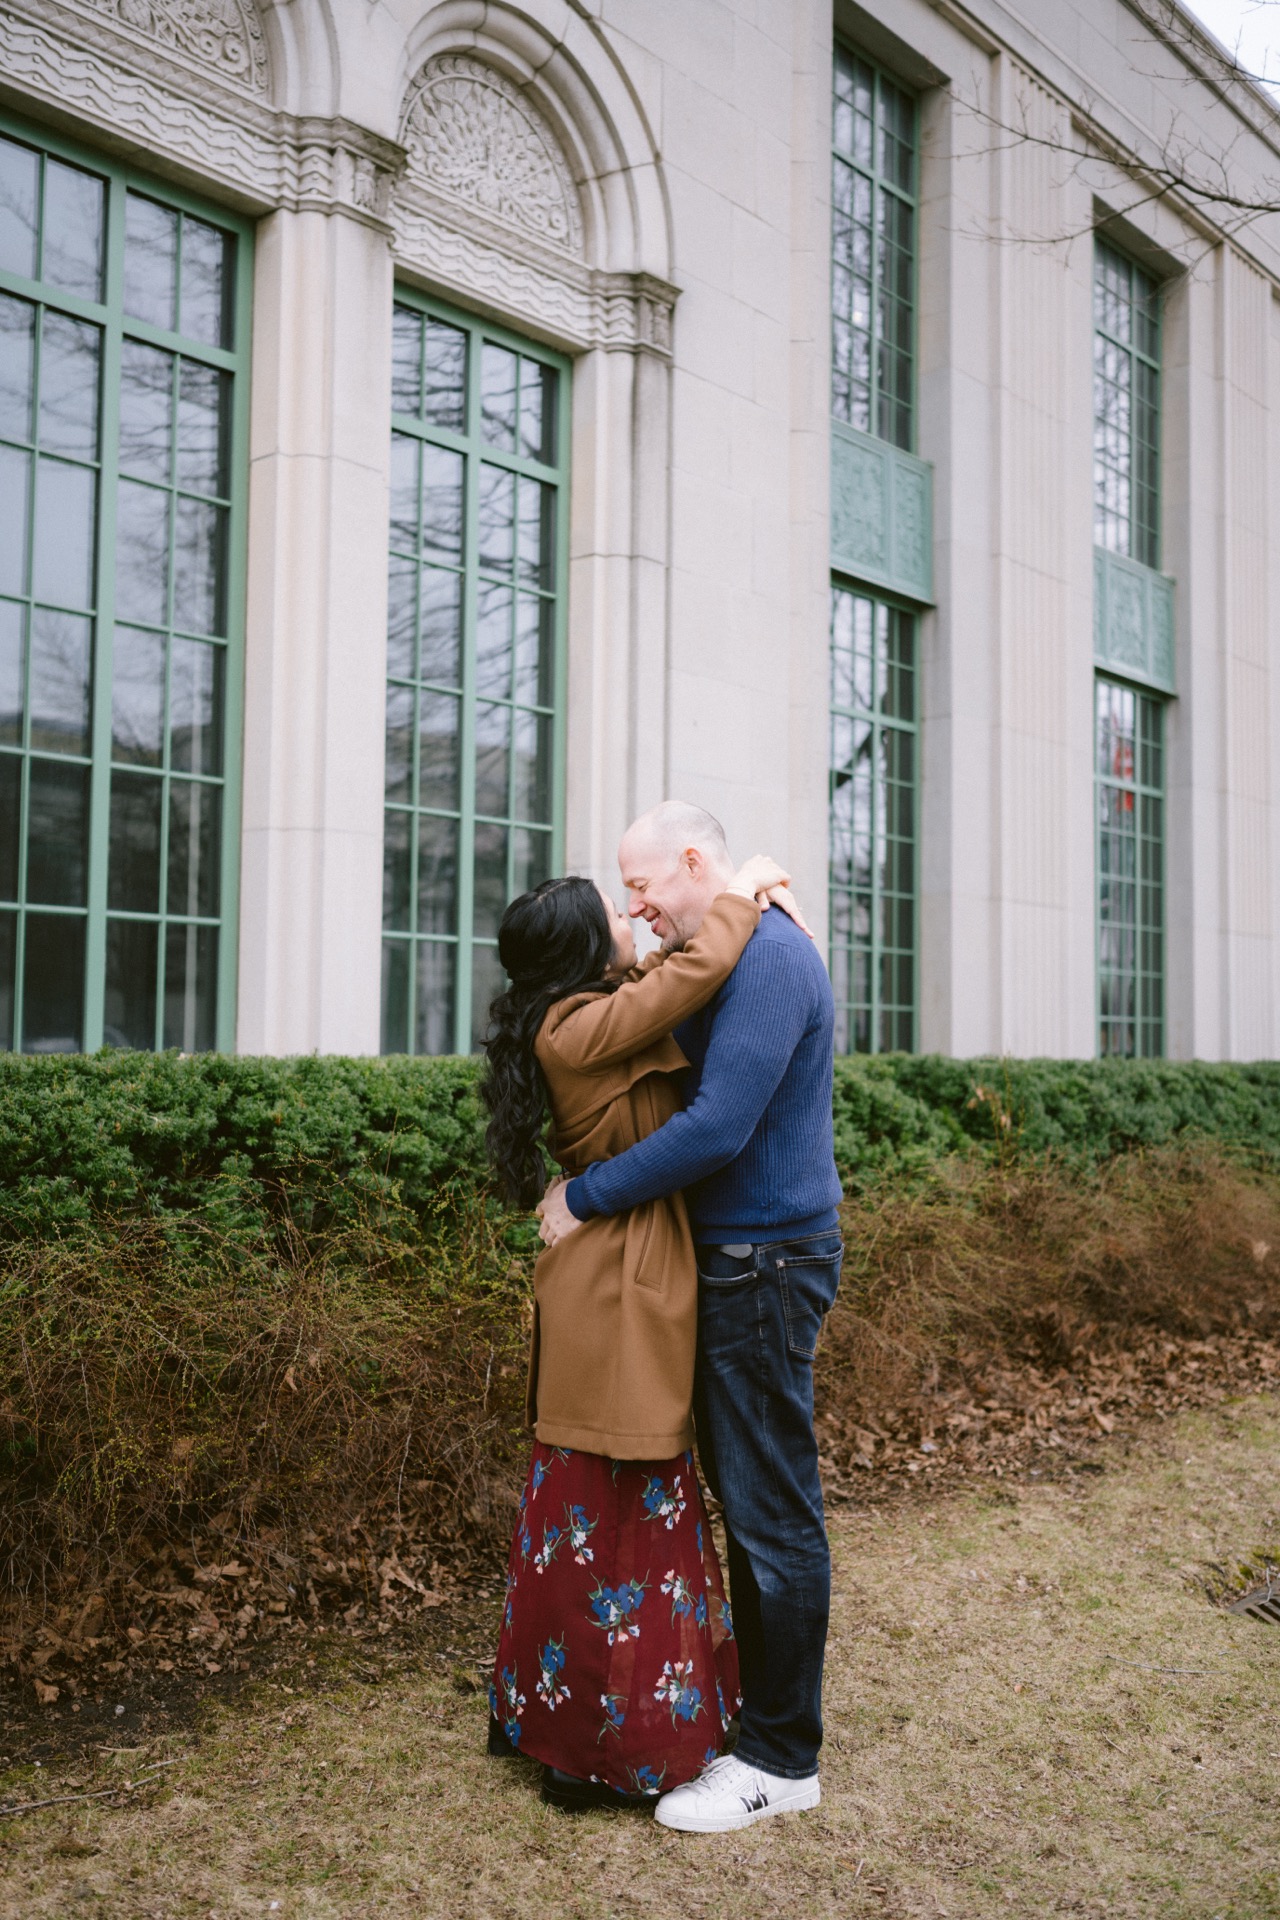 Couple sharing an affectionate embrace outdoors near a building with arched windows.